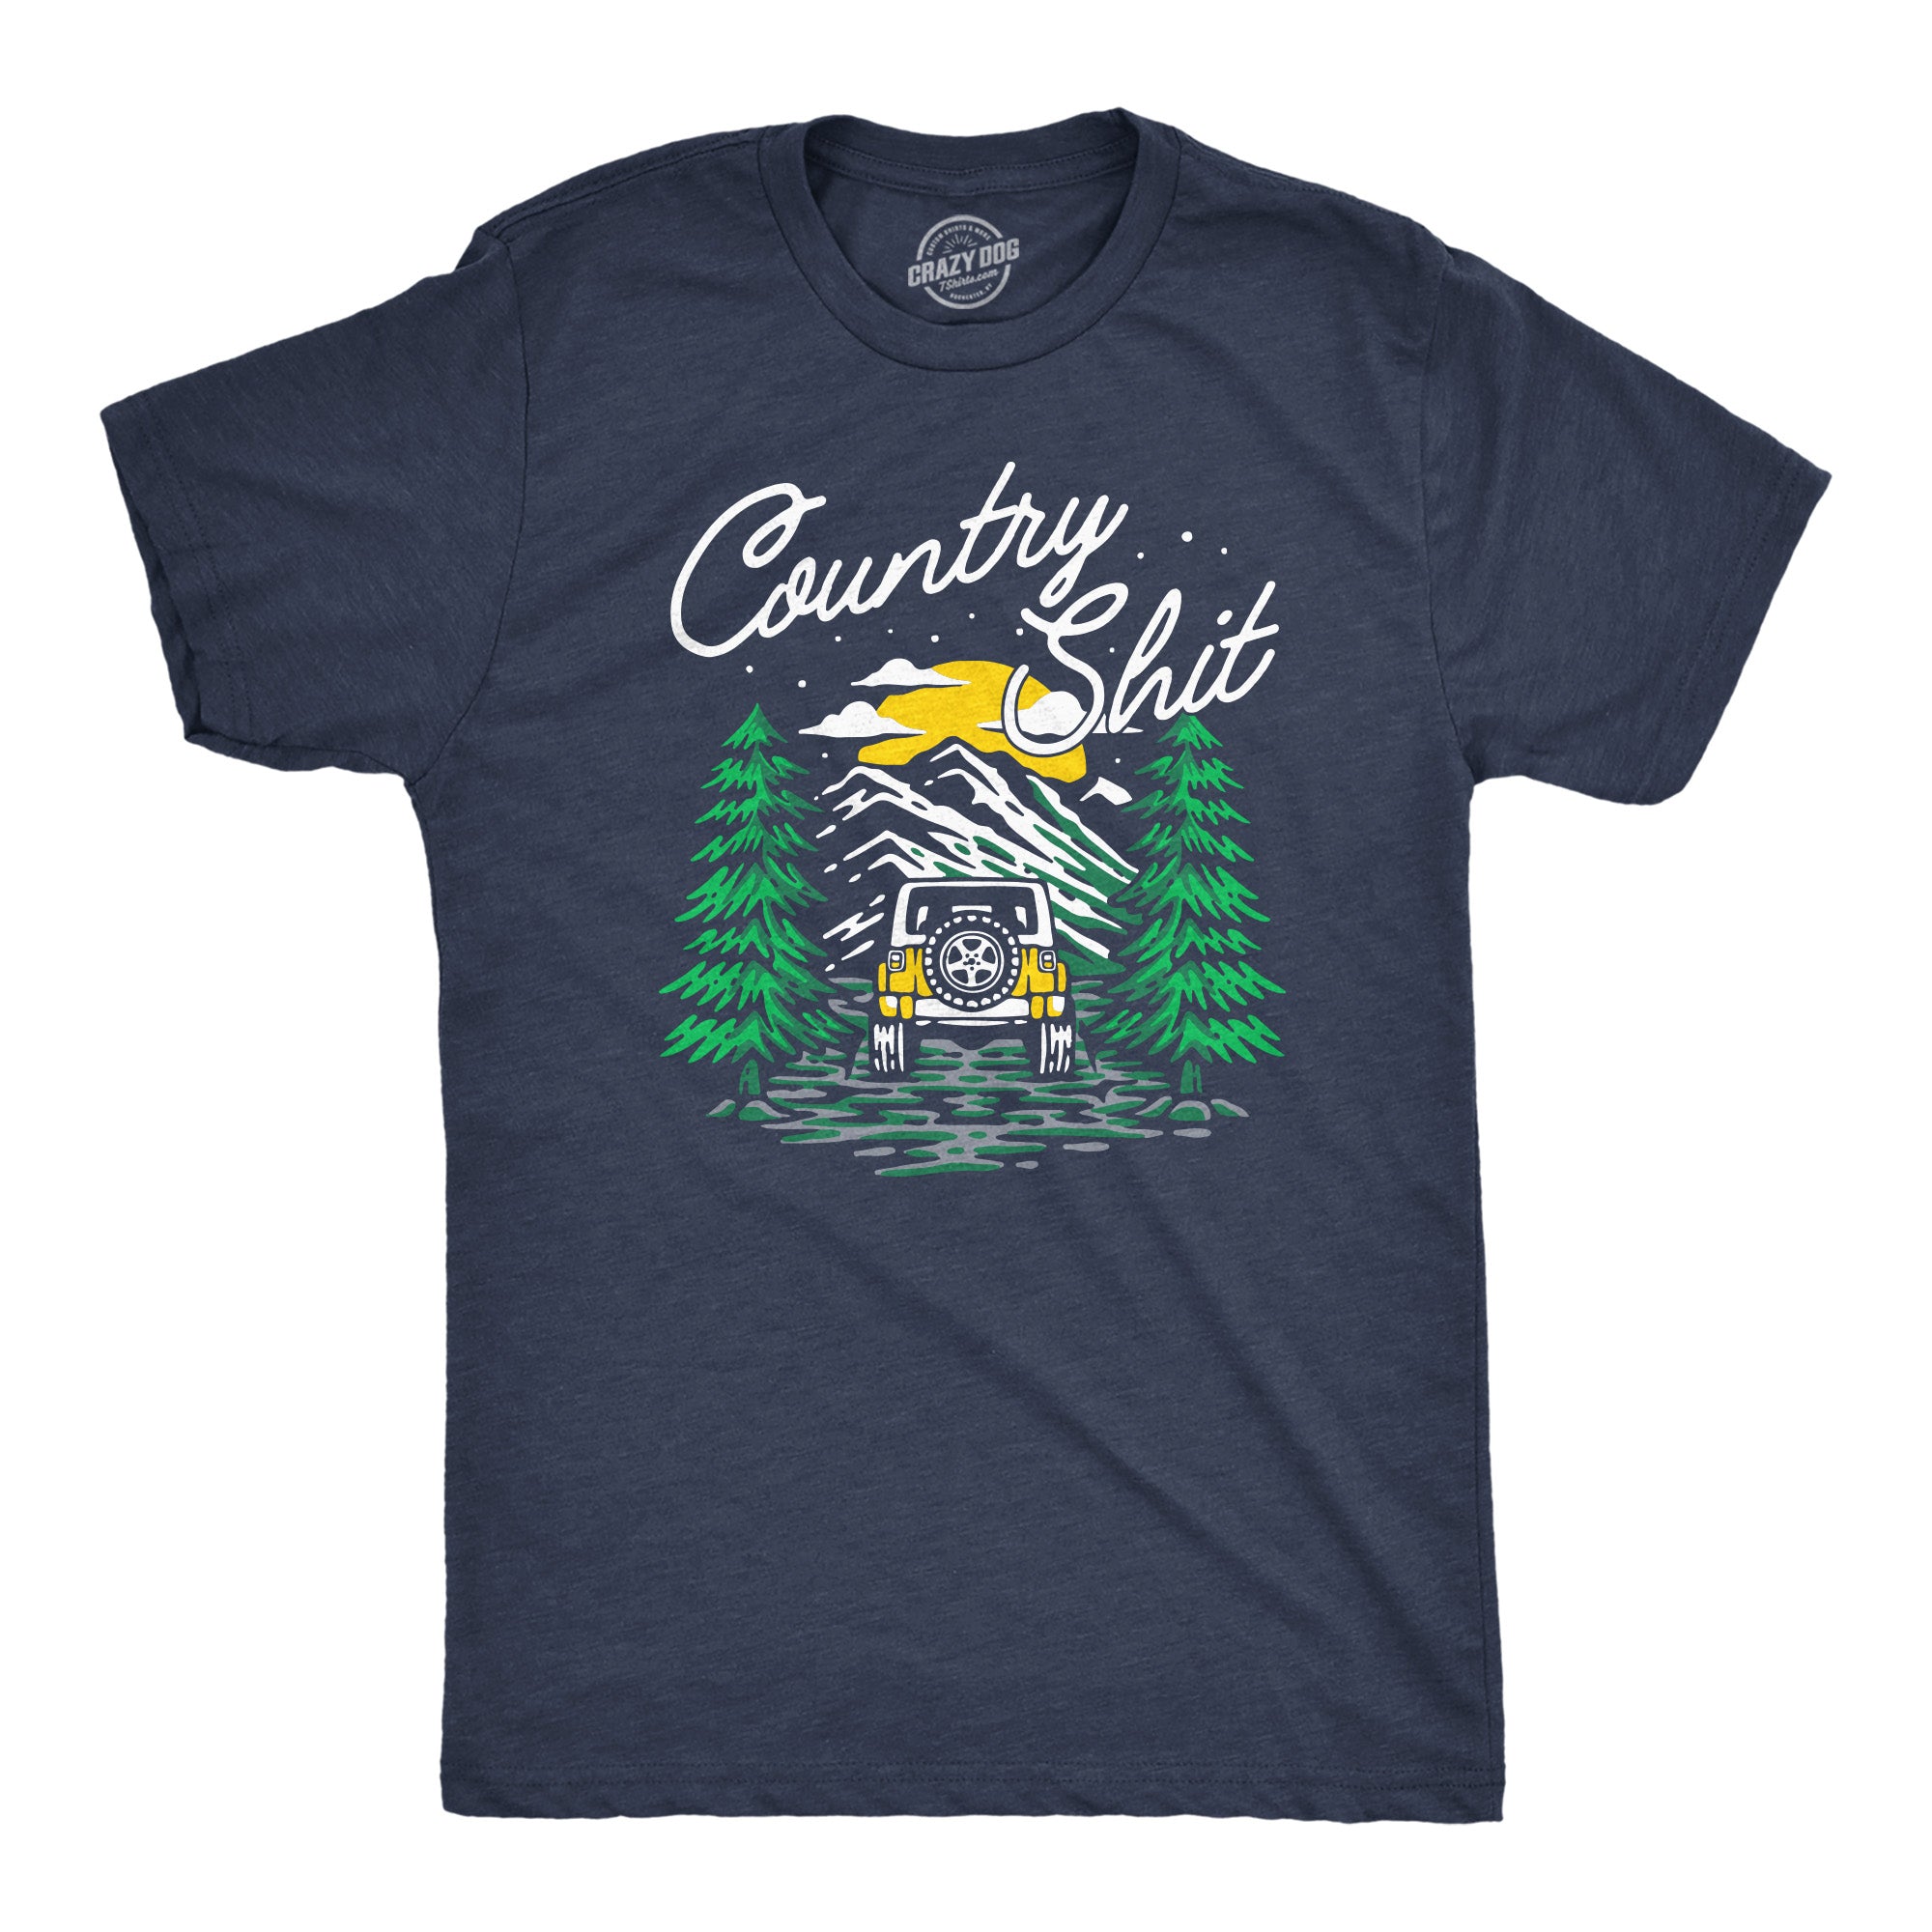 Funny Heather Navy - COUNTRY Country Shit Mens T Shirt Nerdy camping Tee